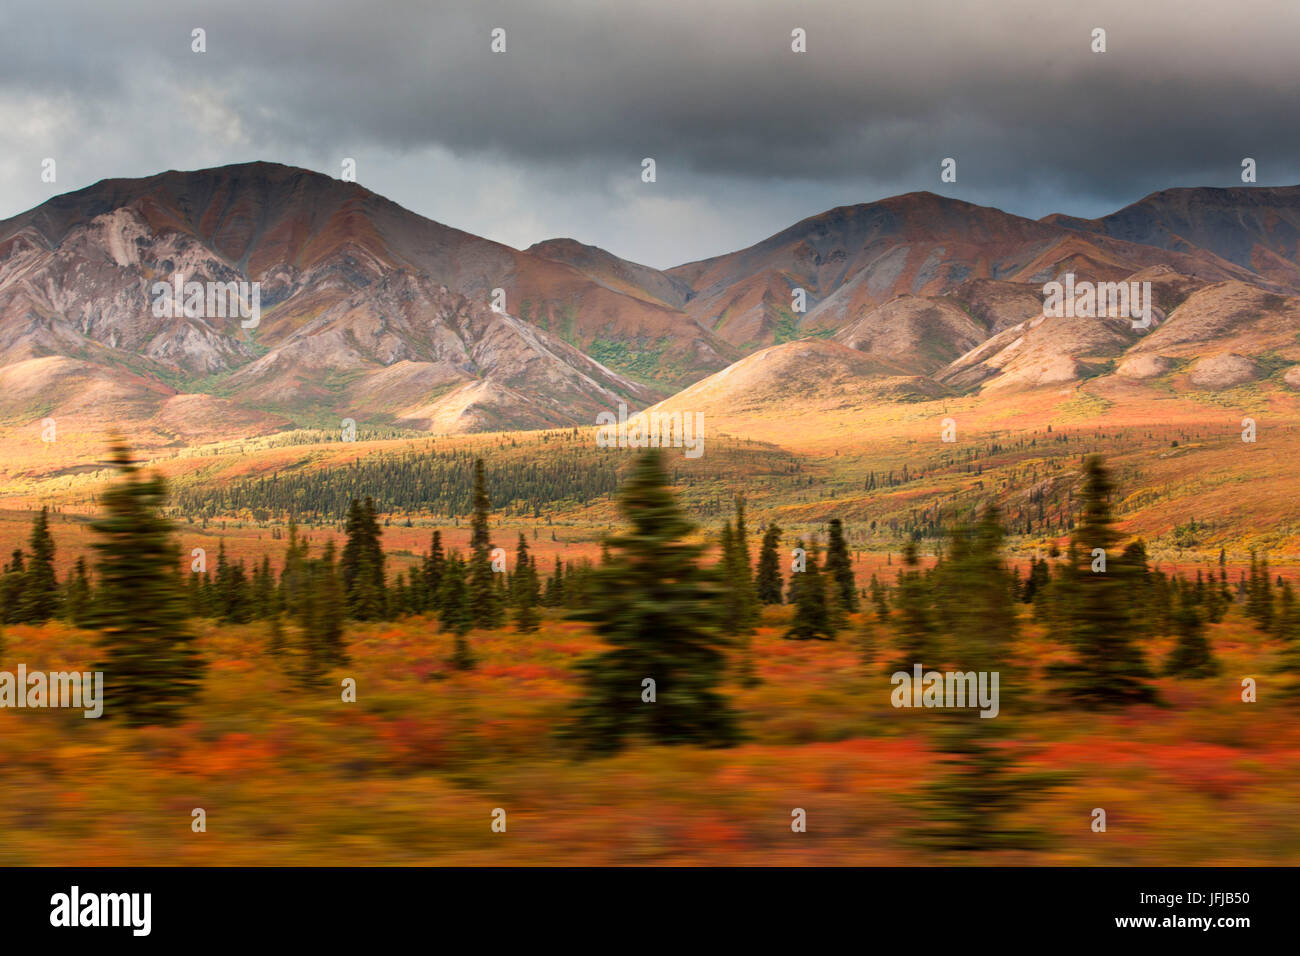 The fall colors of the tundra in the Denali area, Alaska, panning shot from a moving bus, Stock Photo